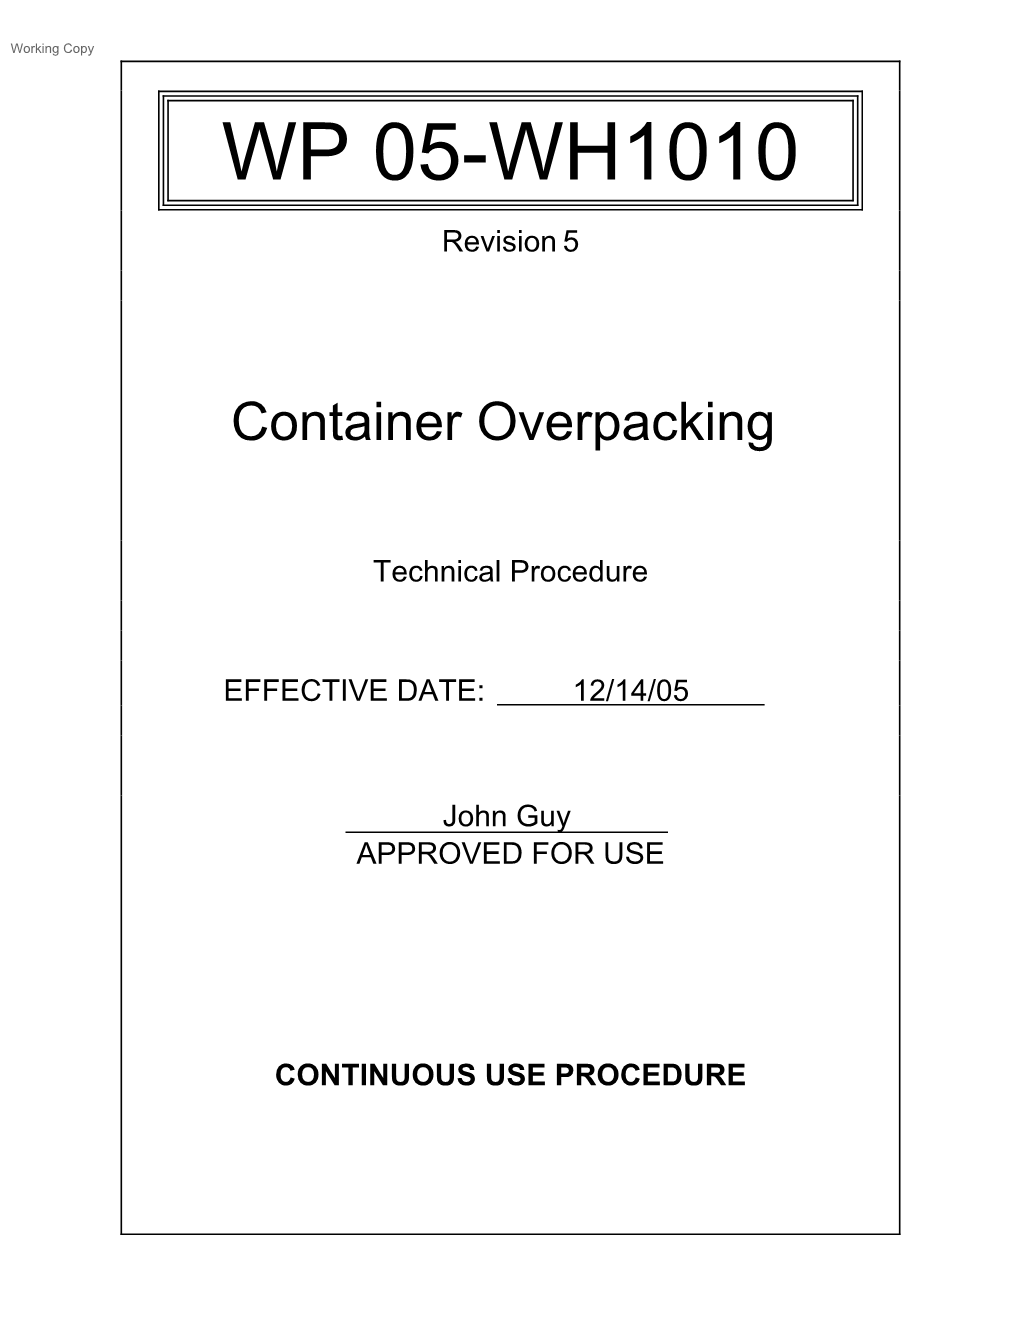 Container Overpacking